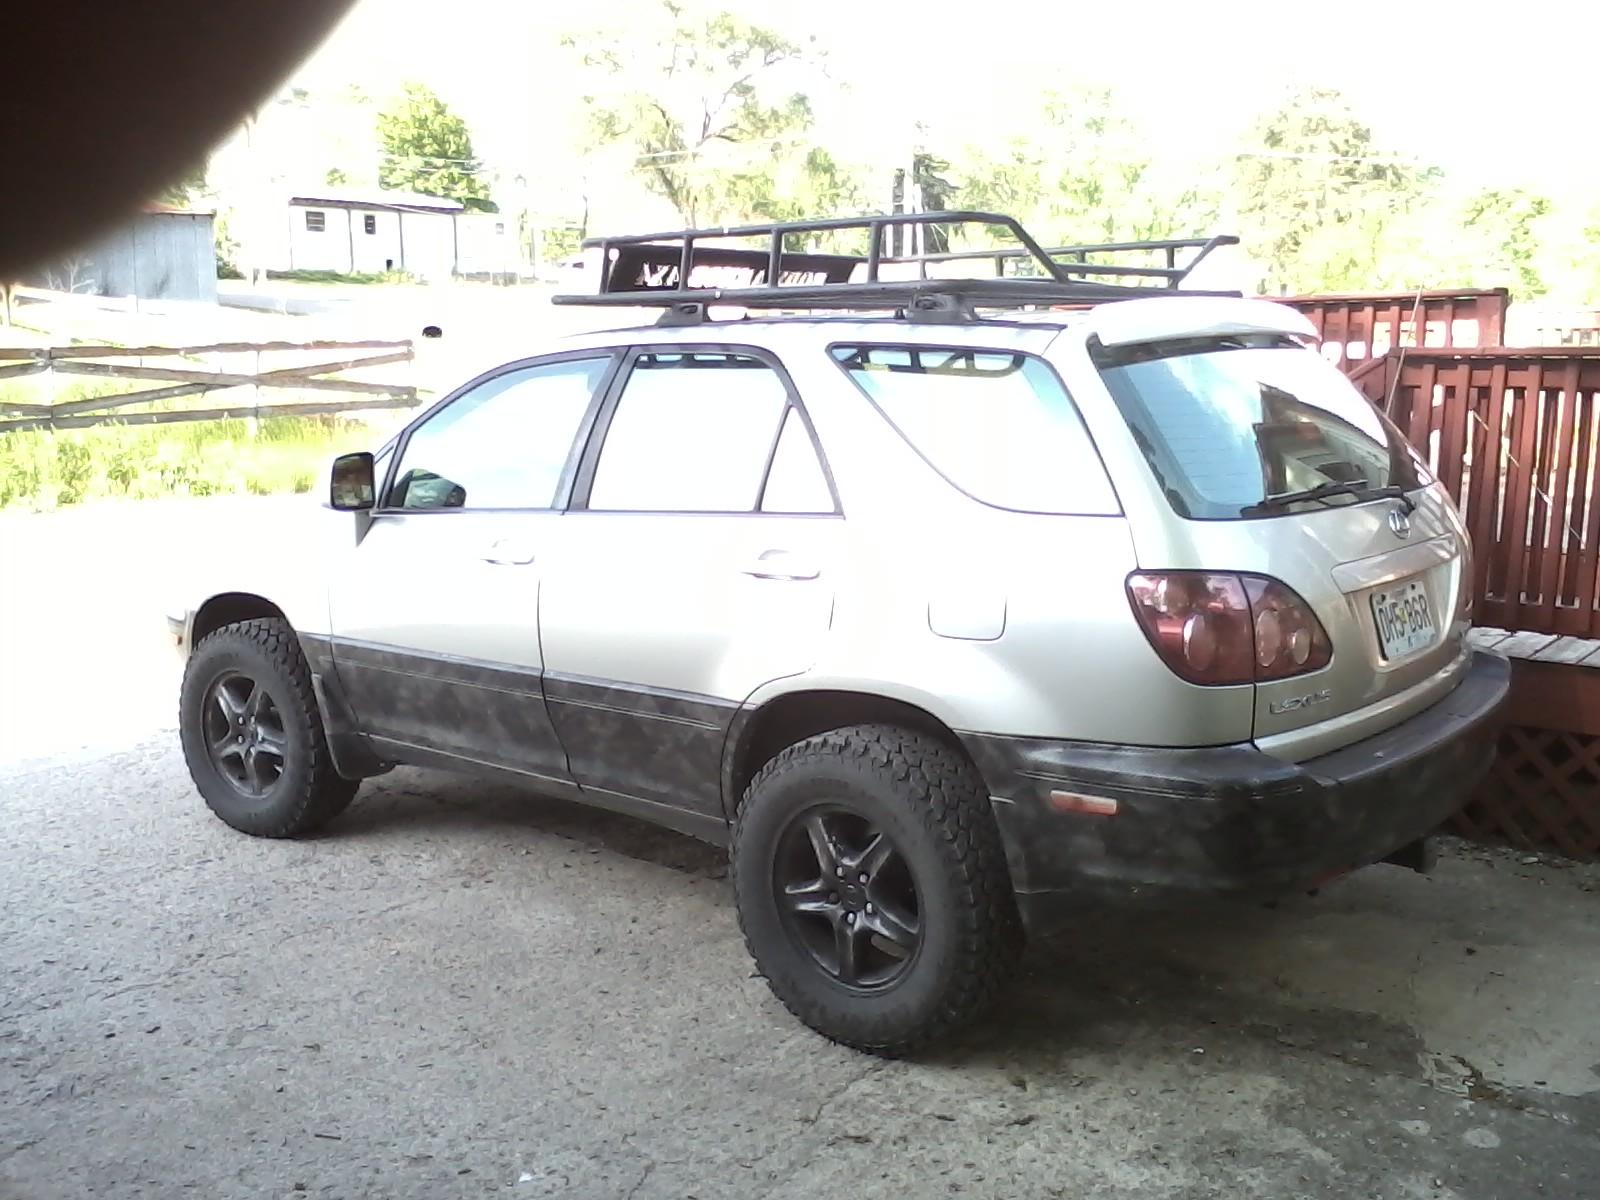 Lifted Rx300 With Big Tires 99 03 Lexus RX300 Lexus